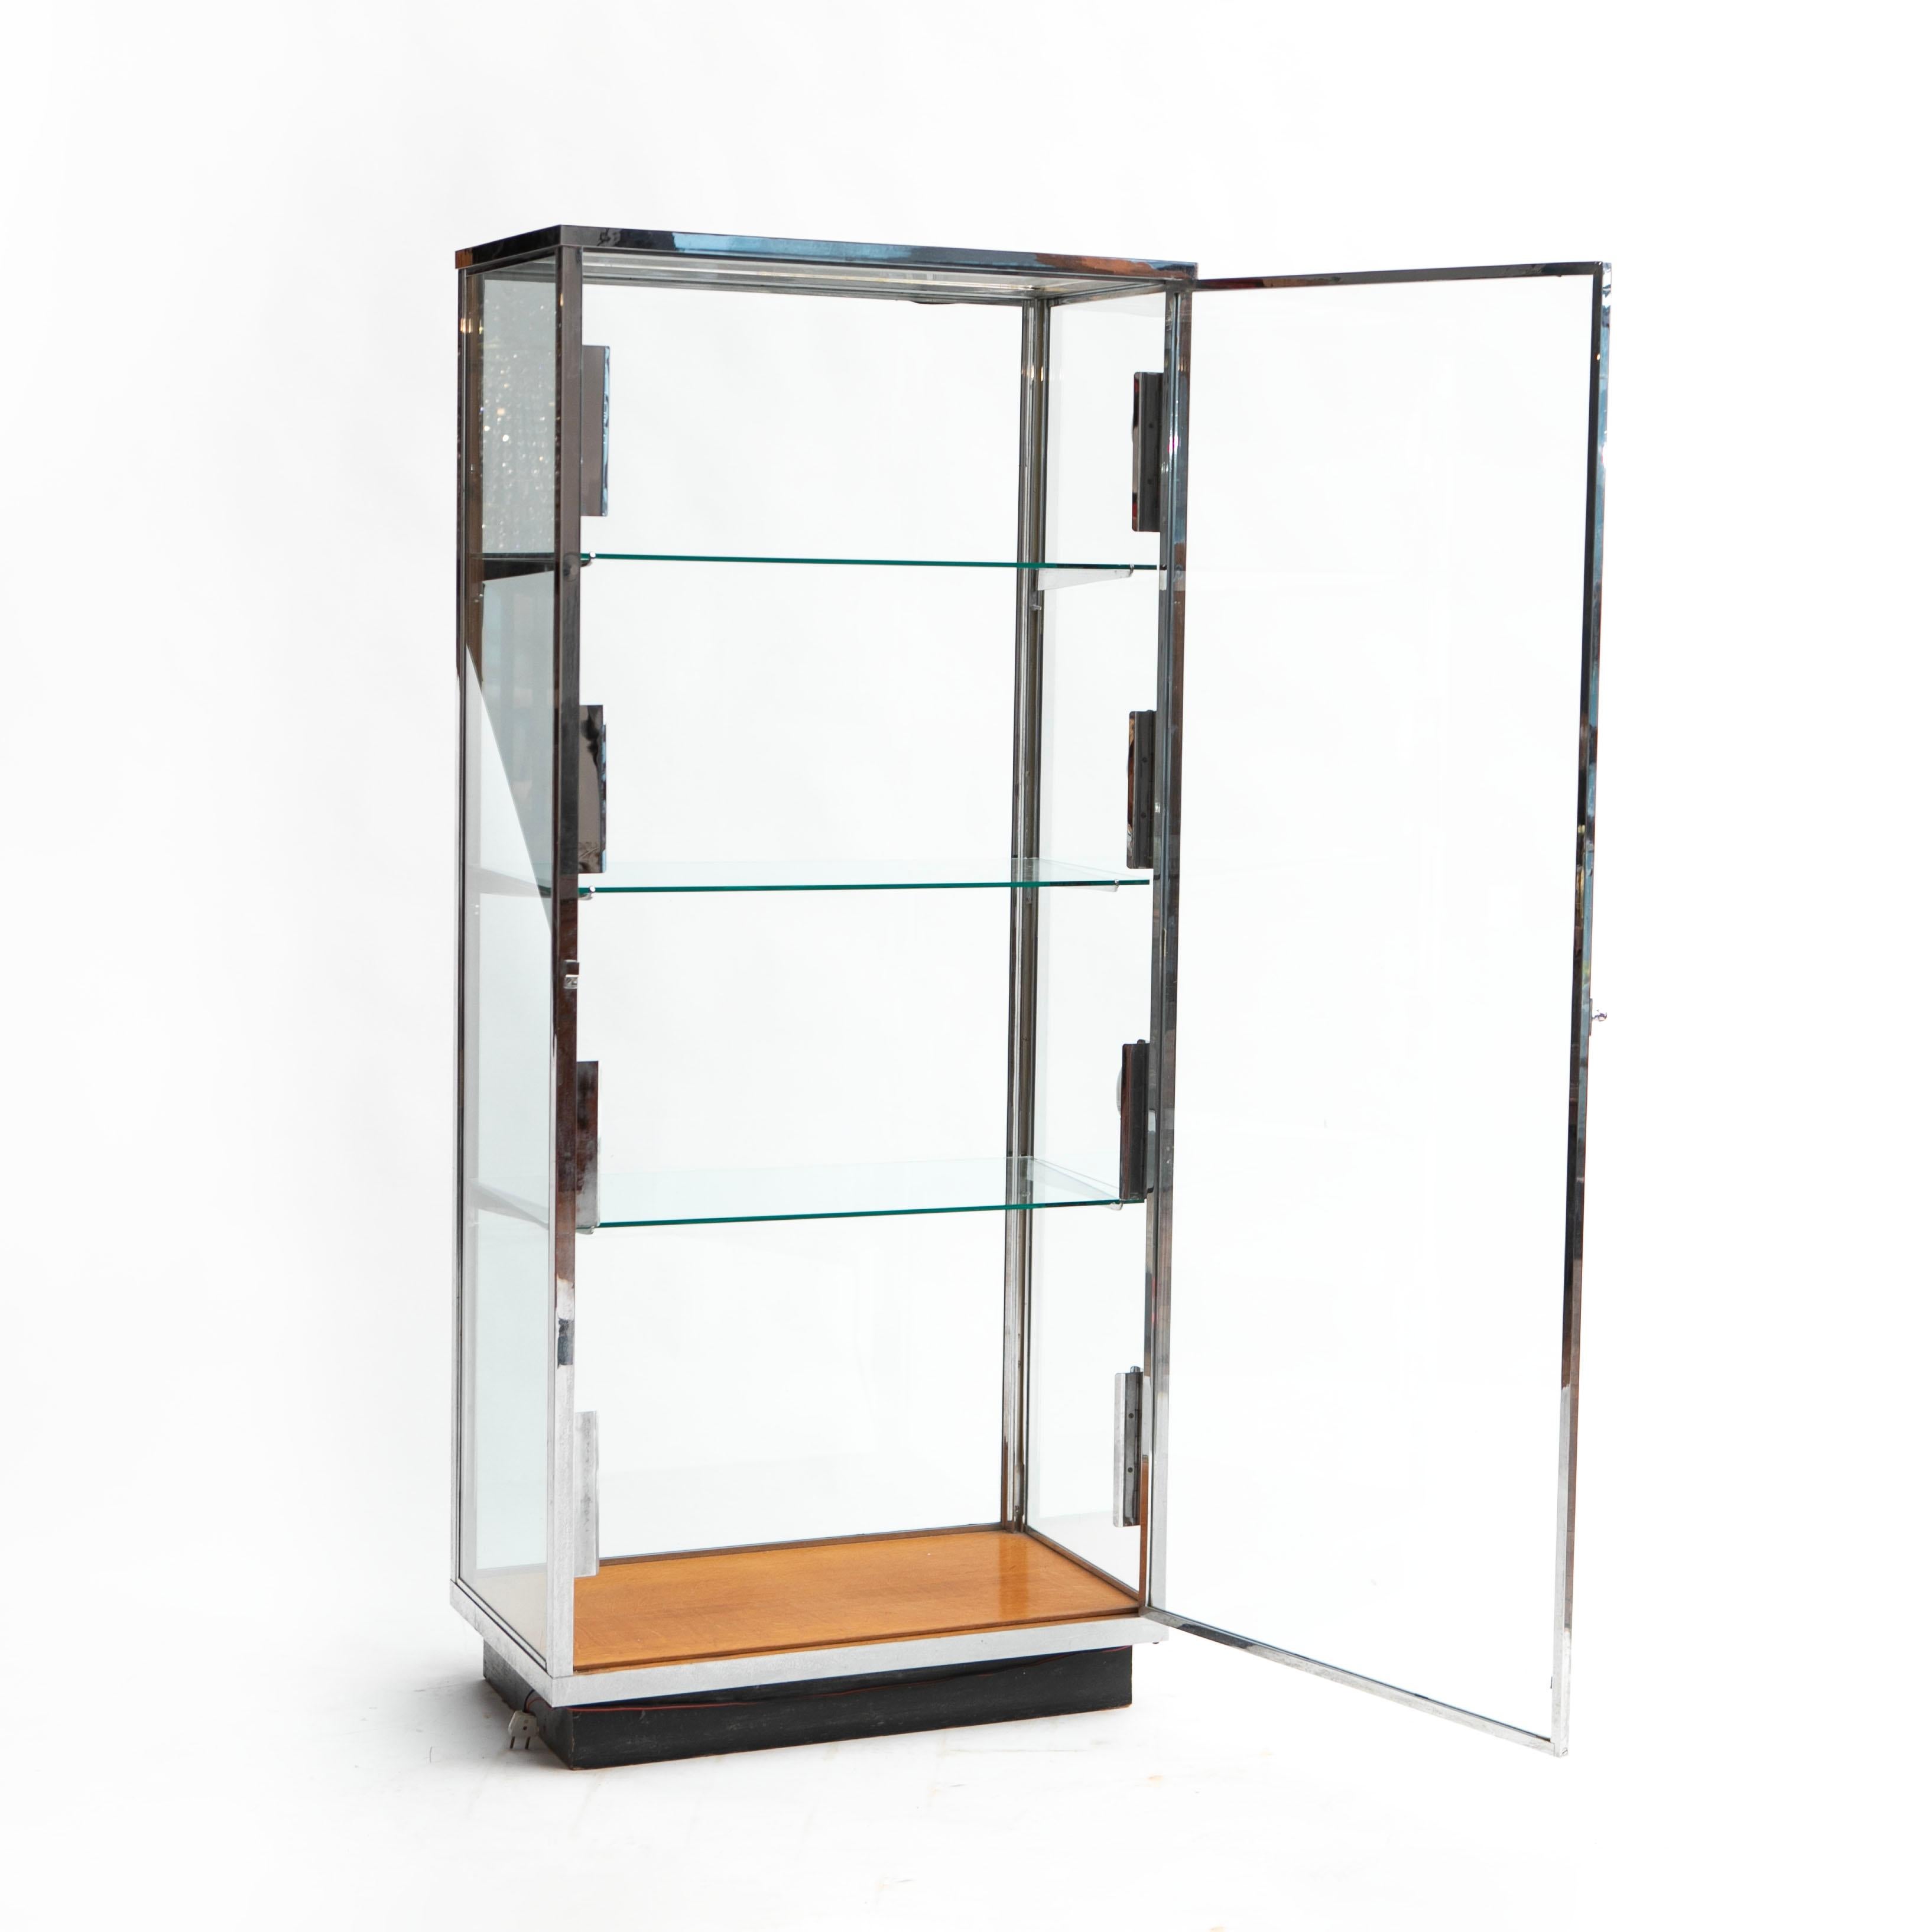 Danish Art Deco Chrome and Glass Display Cabinet For Sale 1